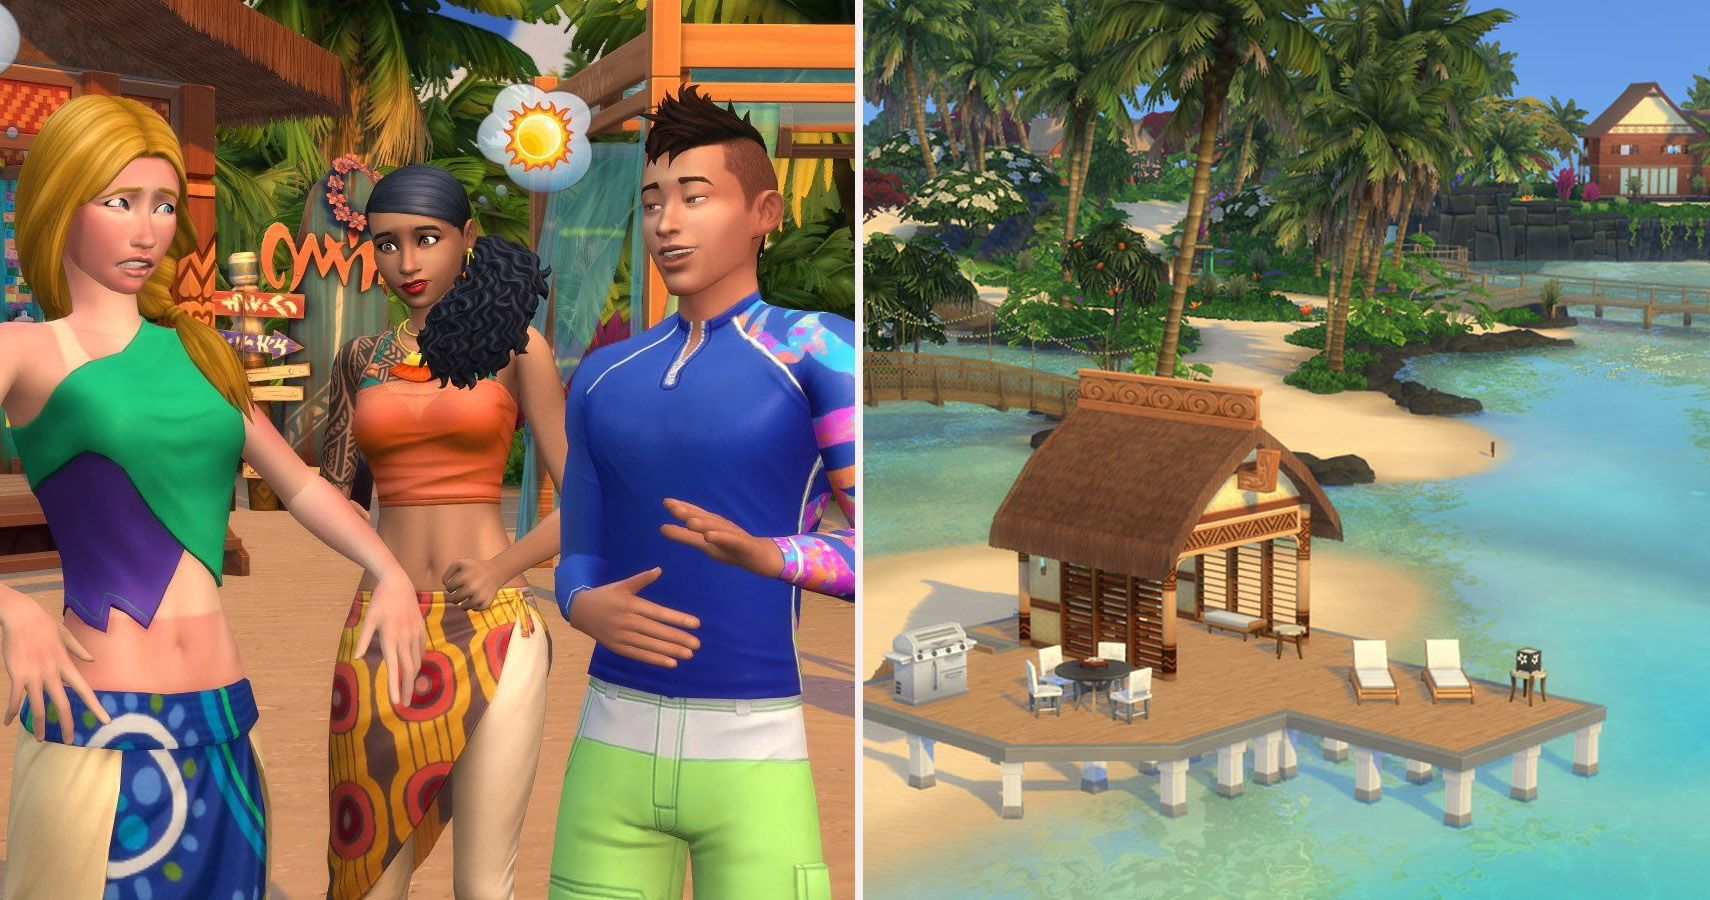 The Sims 4: 15 Exciting New Things Island Living Brings To The Game